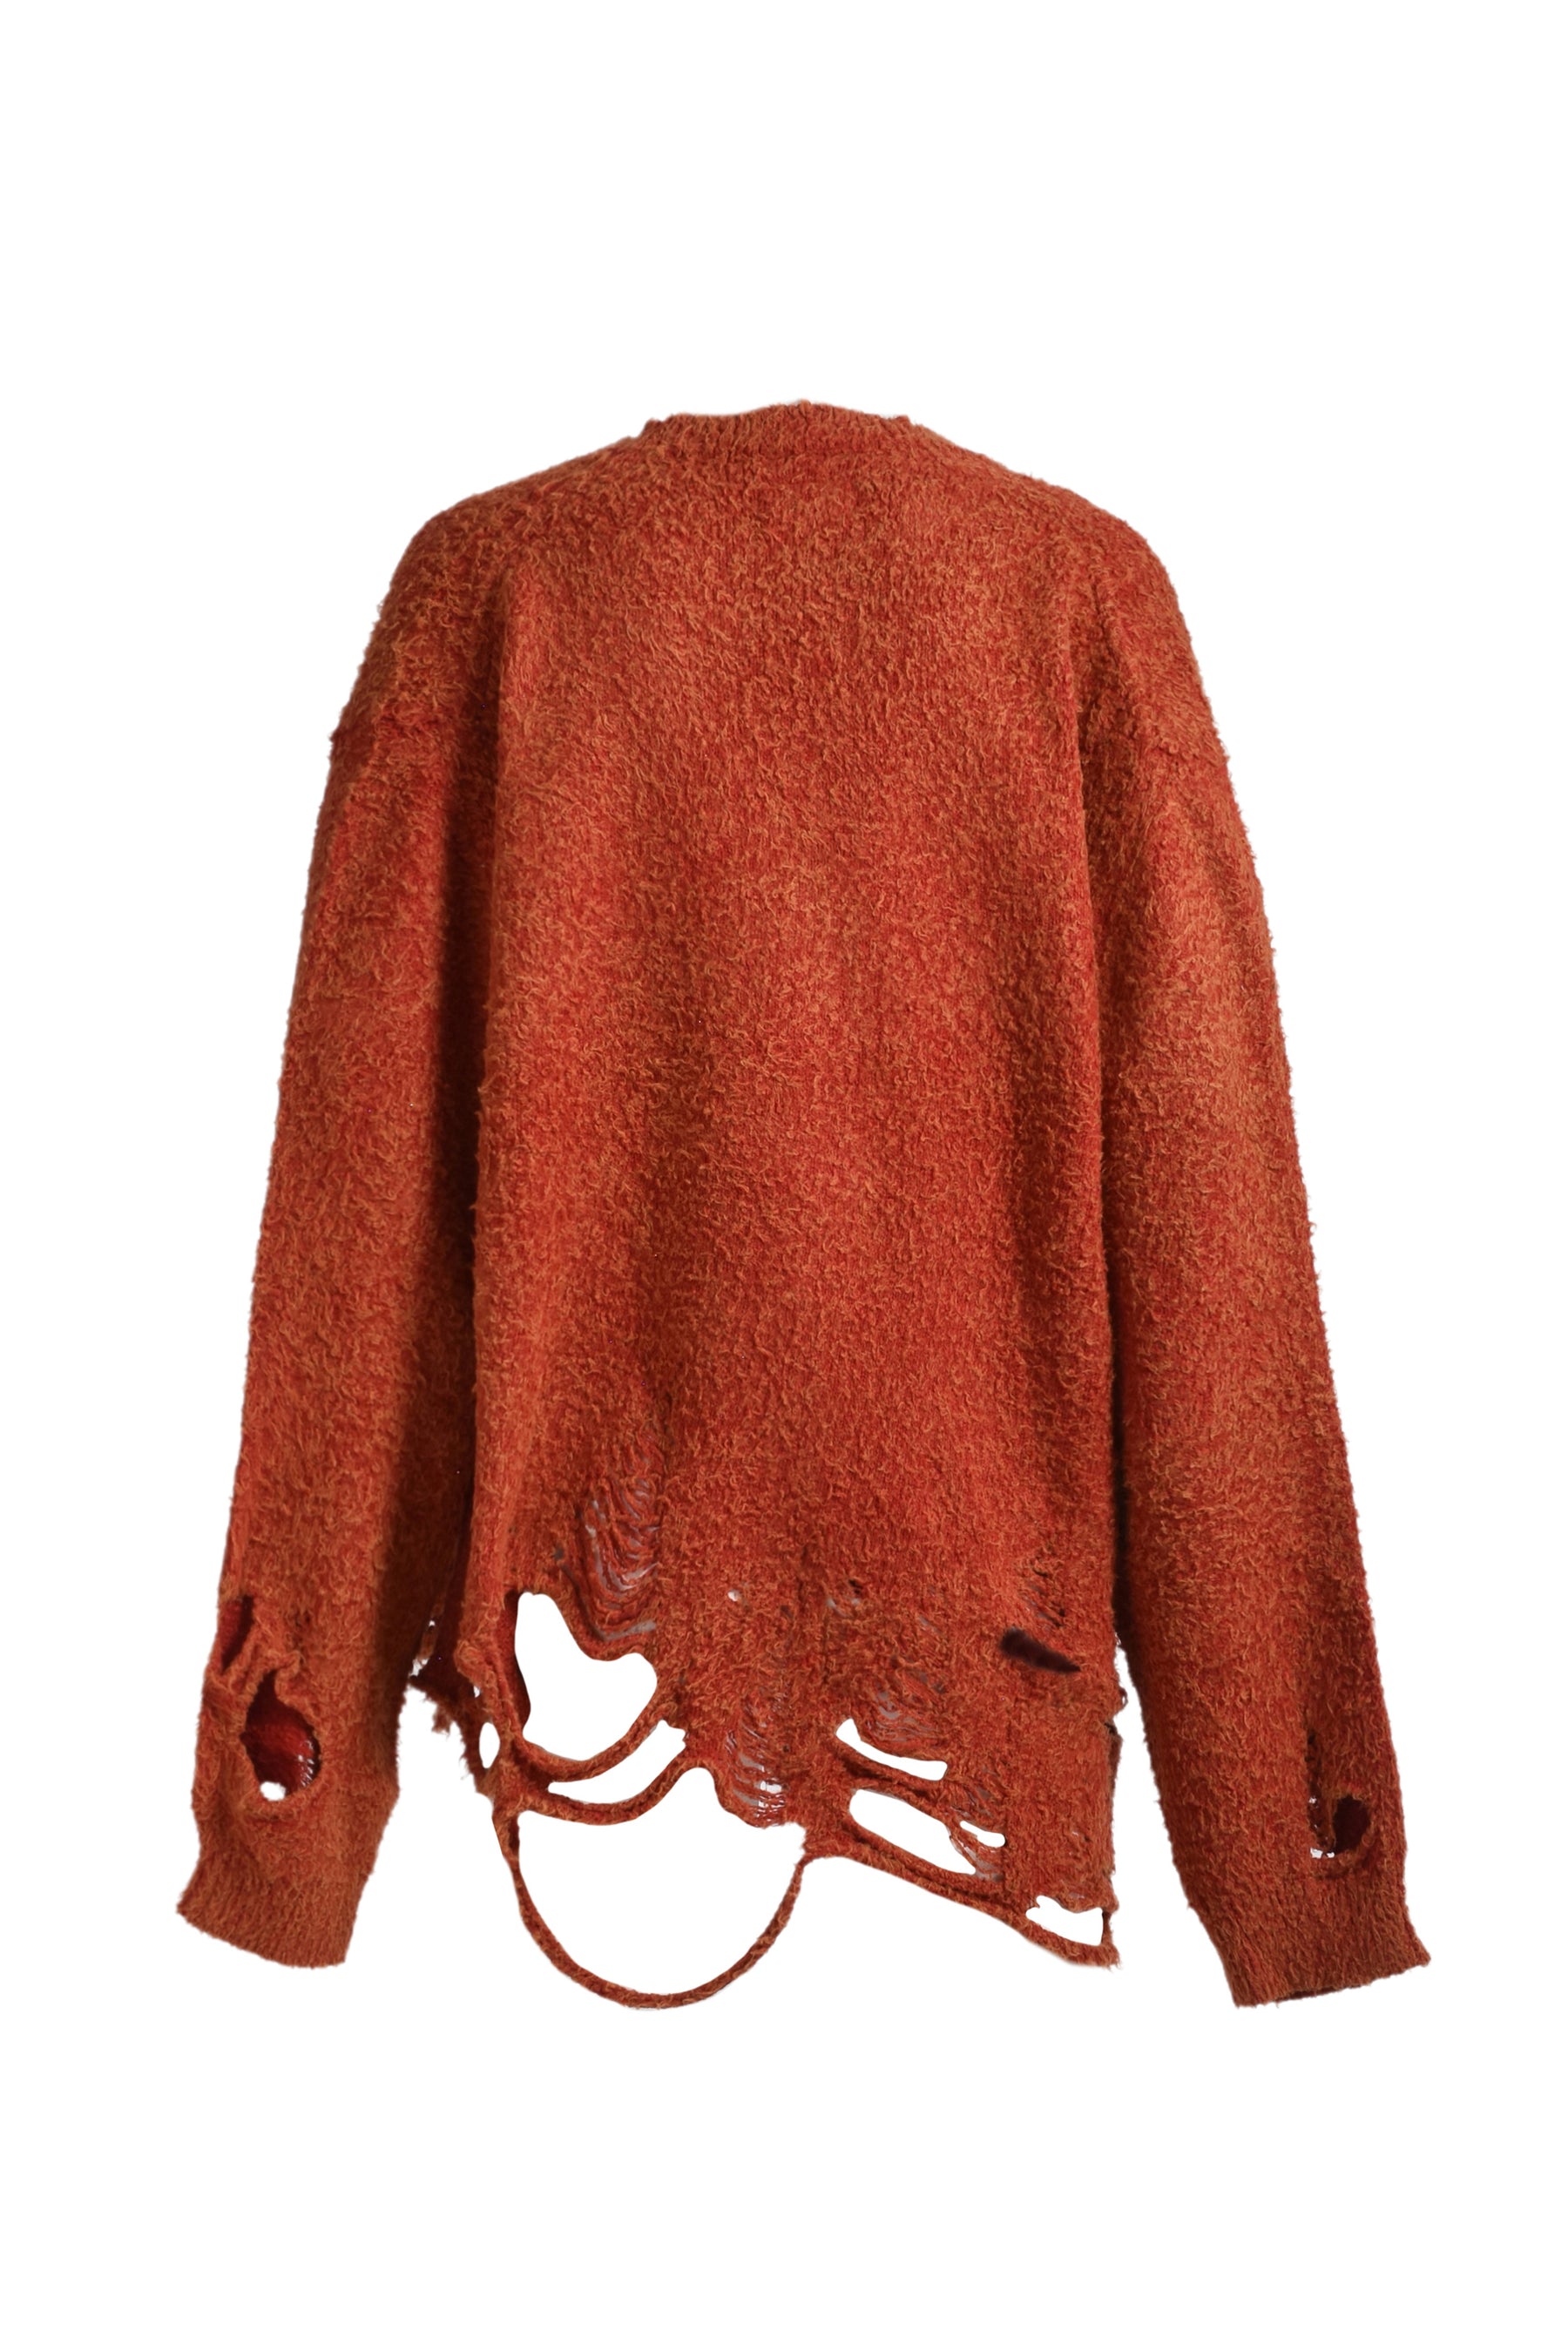 ZOMBIE SILHOUETTE KNIT CARDIGAN / RED